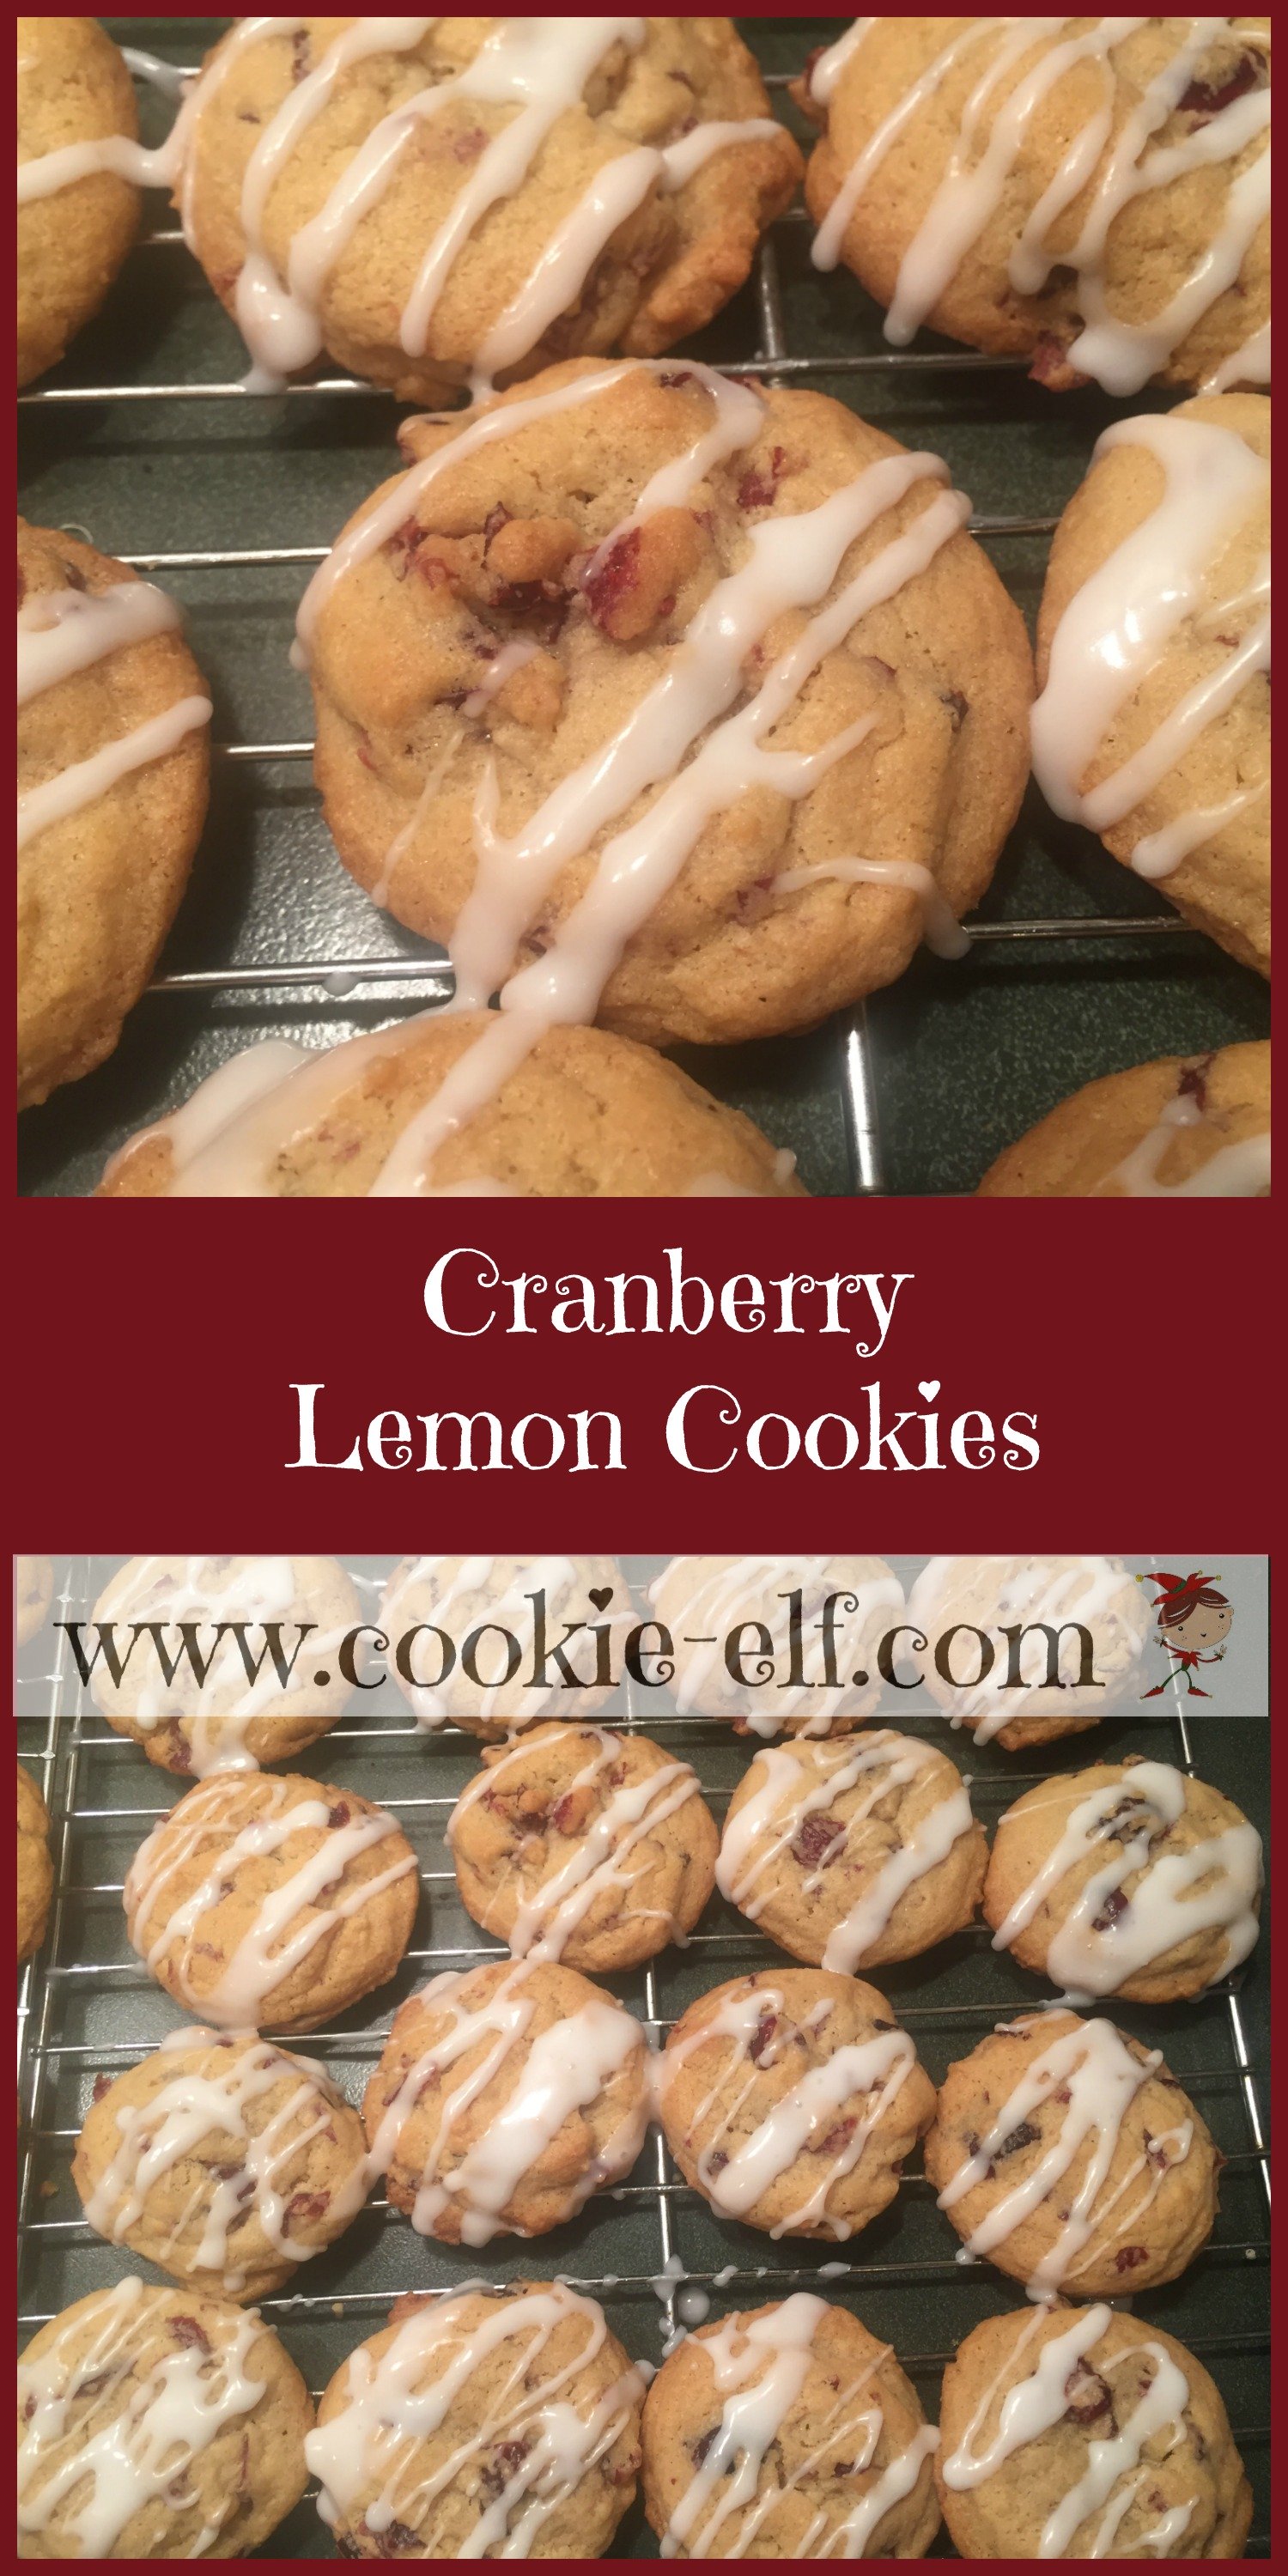 Cranberry Lemon Cookies with The Cookie Elf